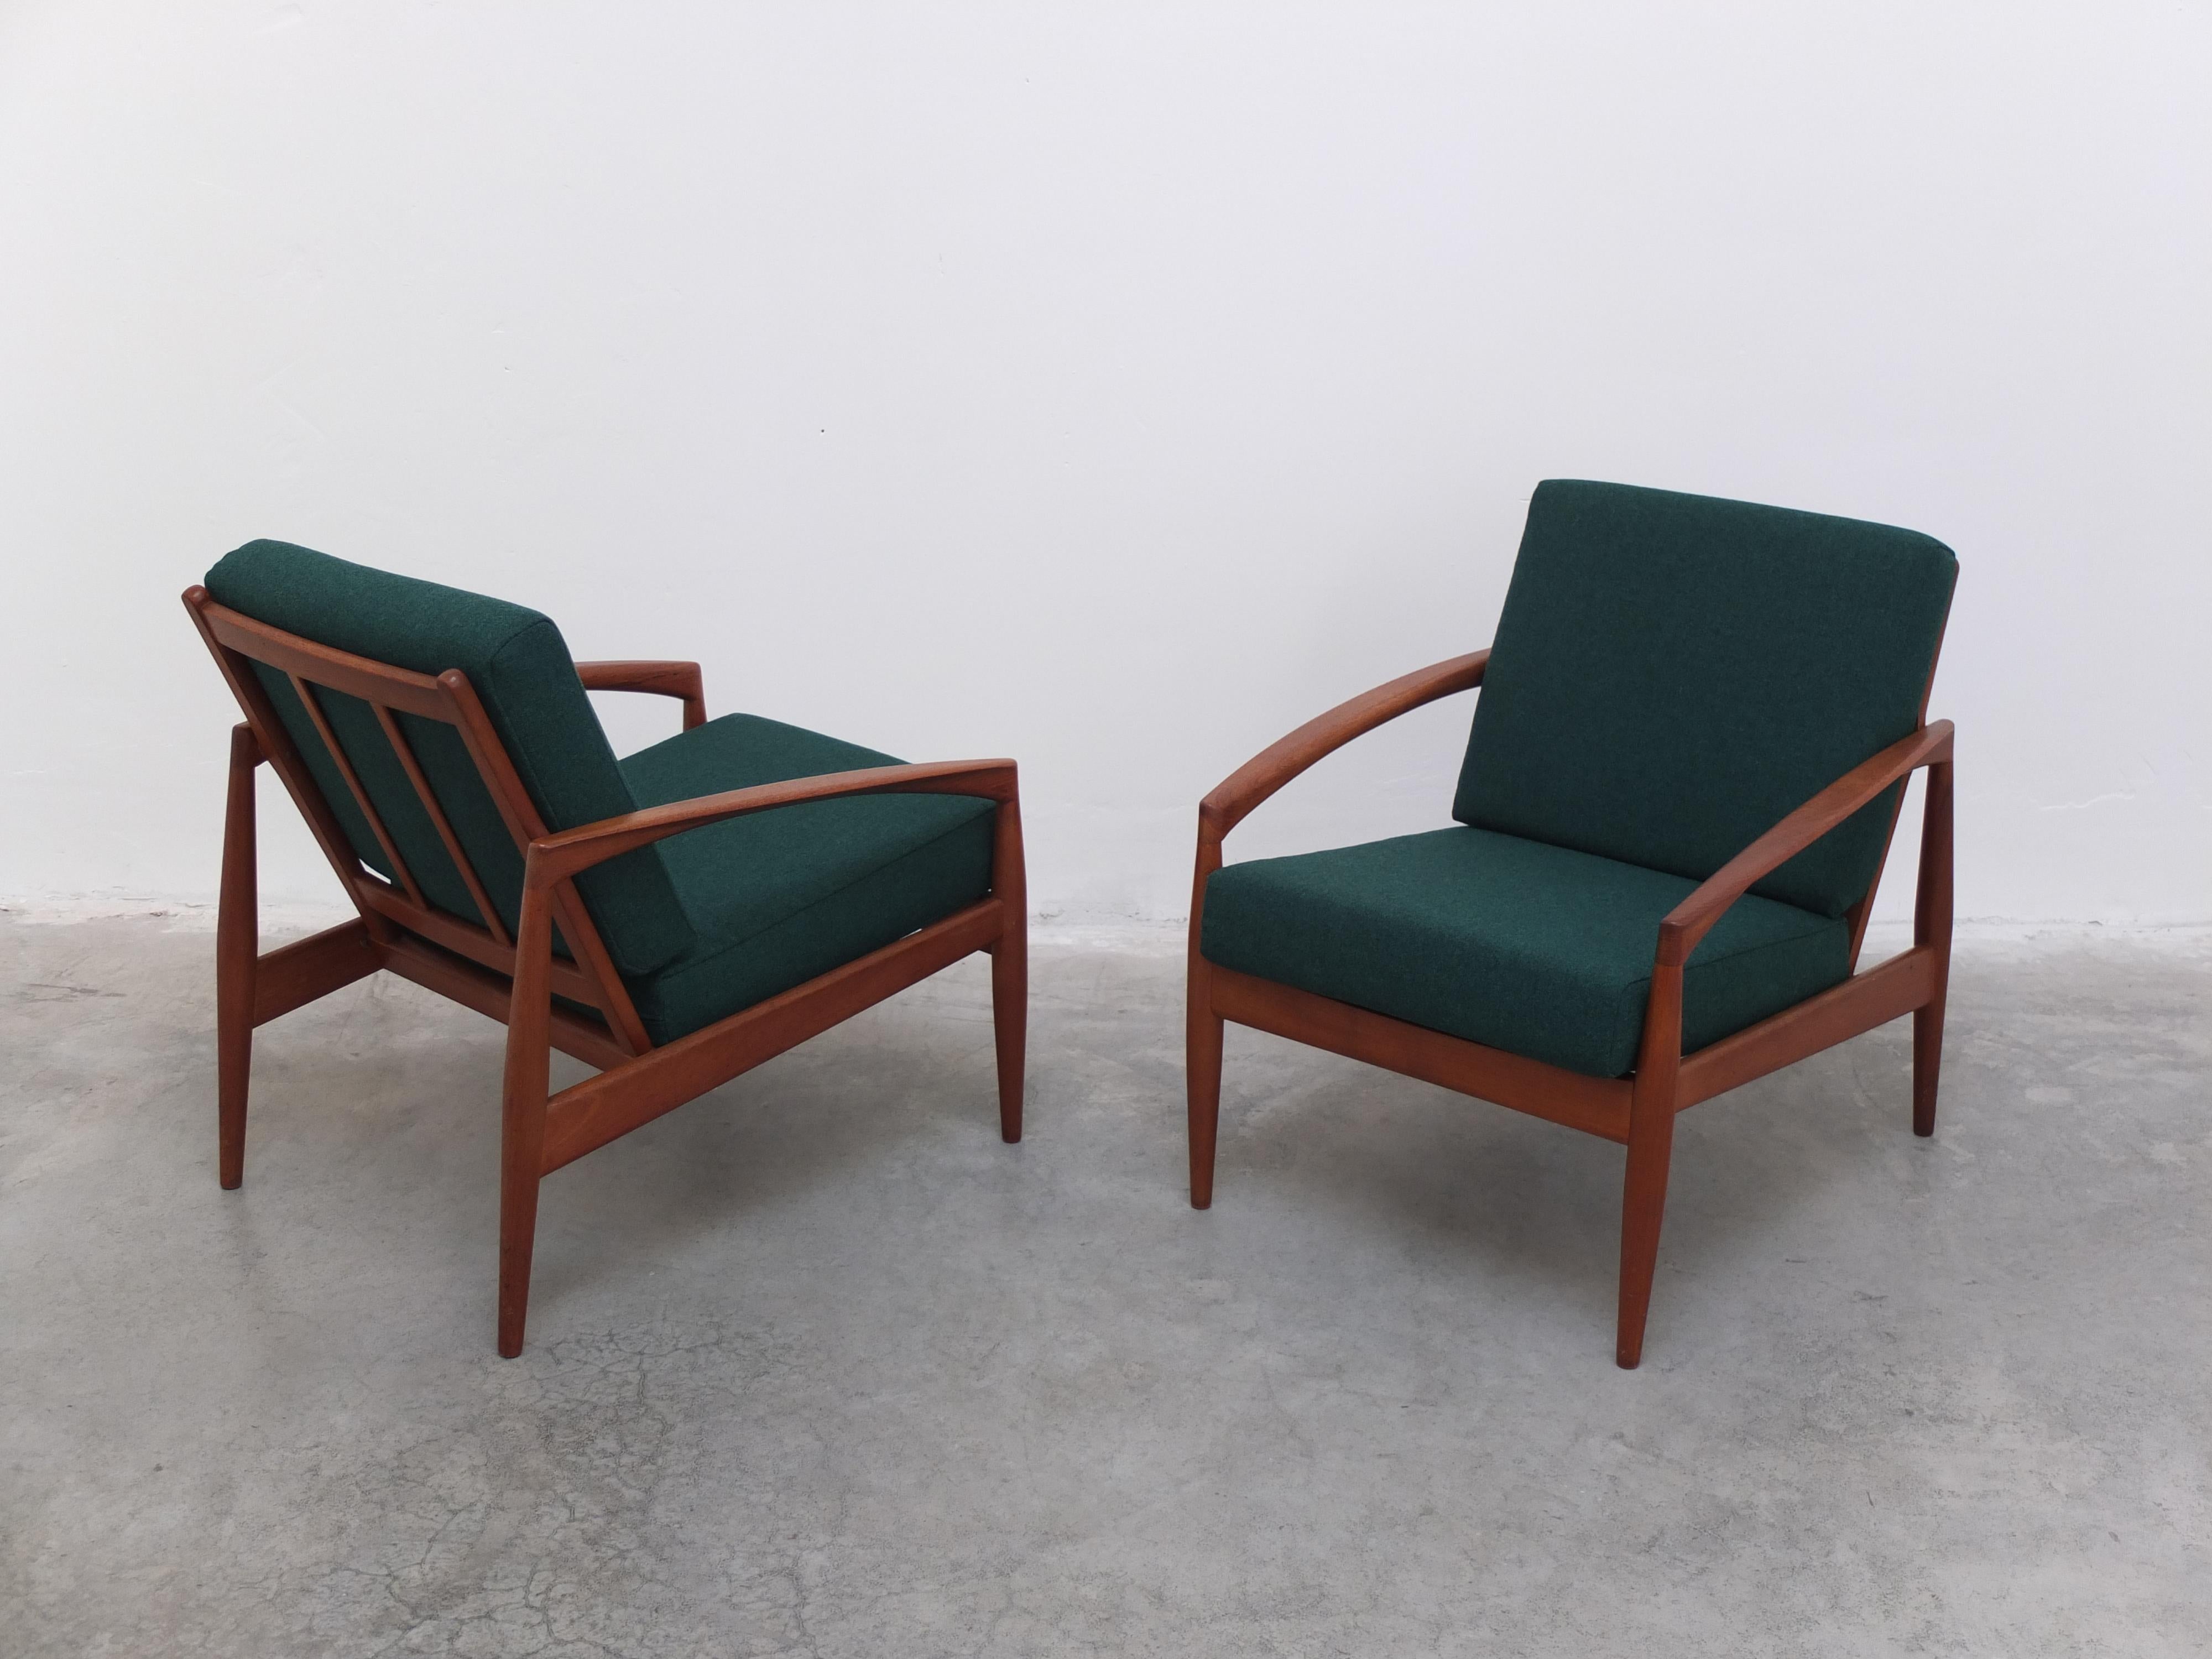 Pair of 'Paper Knife' Easy Chairs by Kai Kristiansen for Magnus Olesen, 1956 For Sale 6